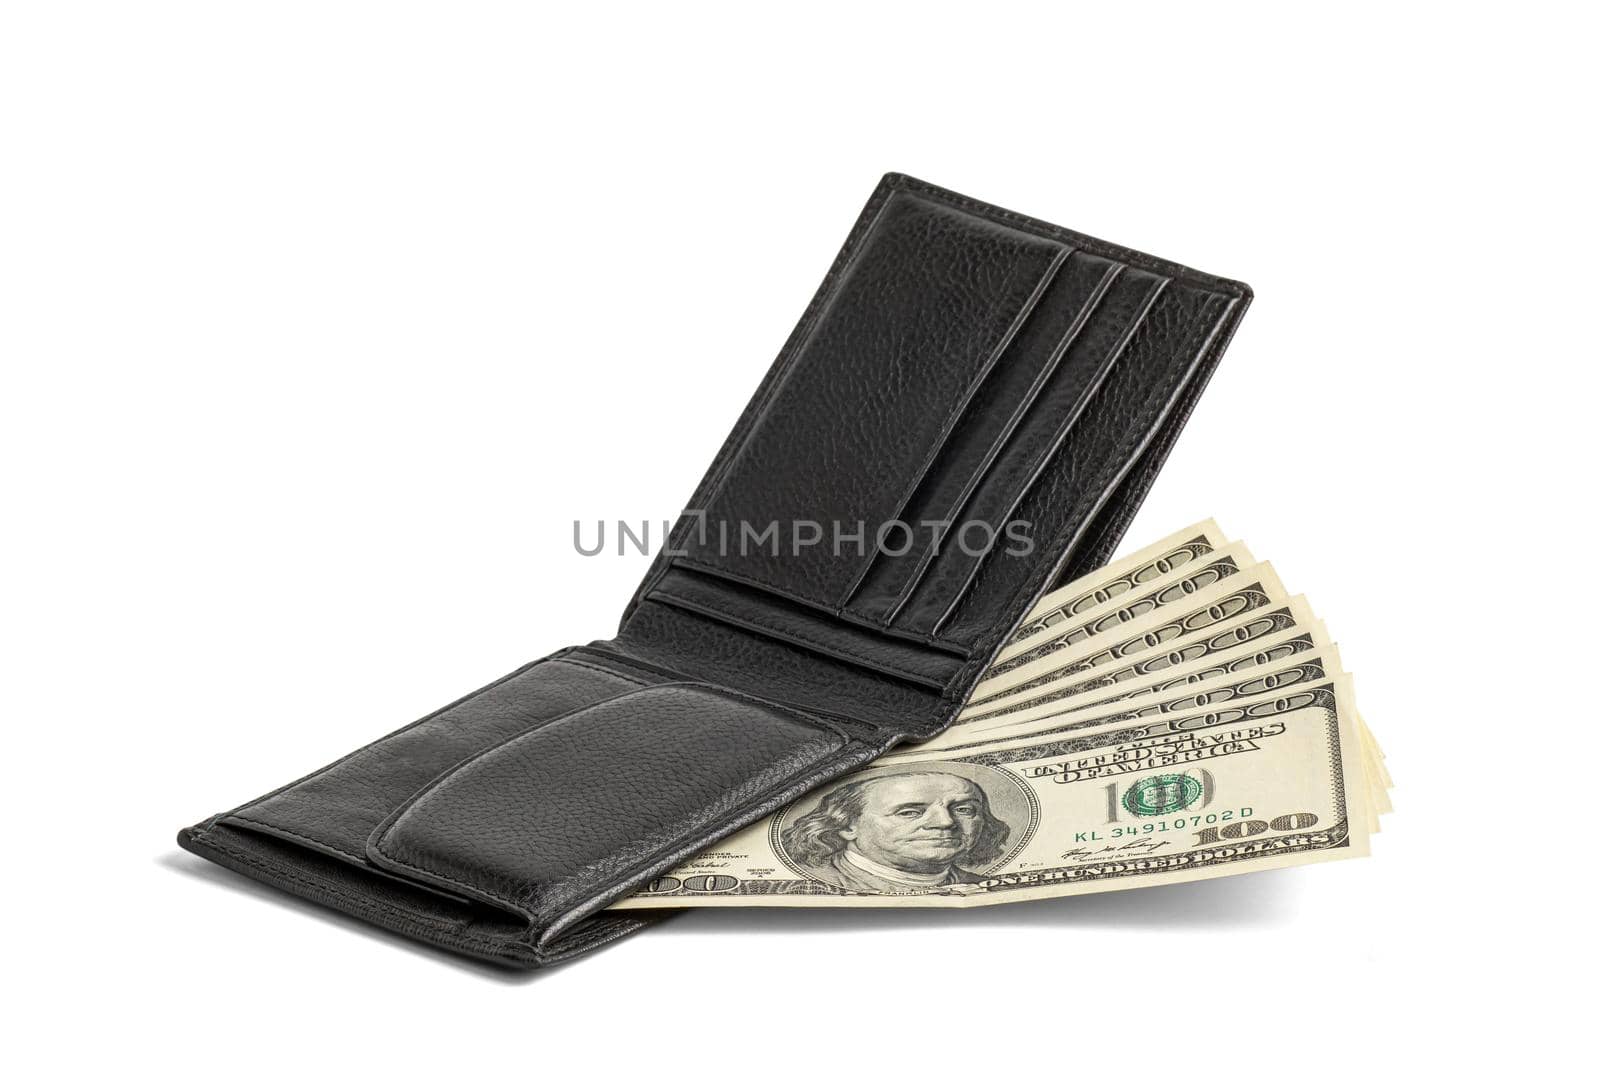 Wallet with banknotes. Paper money in wallet isolated on white with shadow. National currency of the USA.